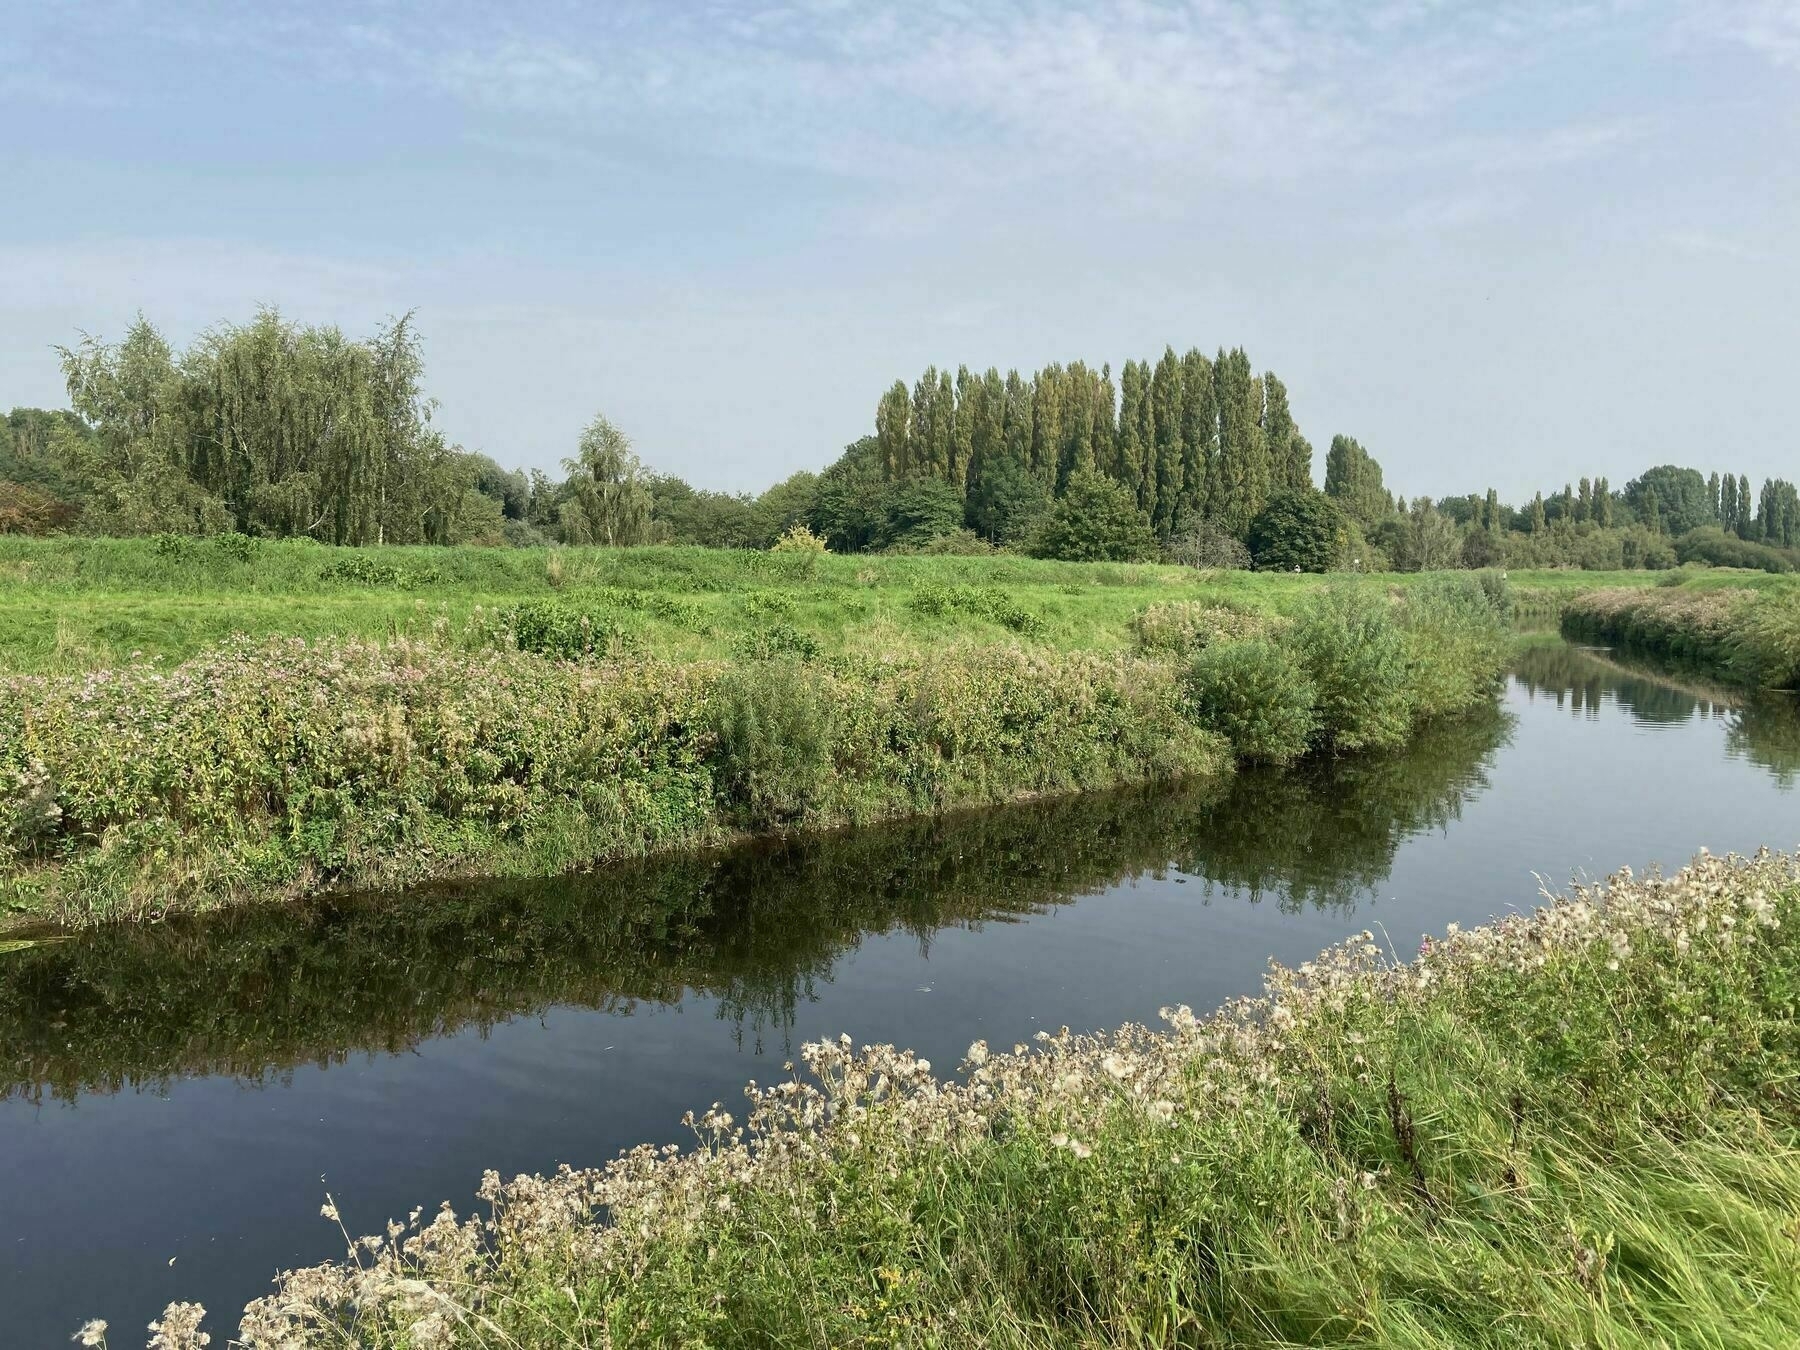 The river Mersey flowing through the tree lined meadows of south Manchester